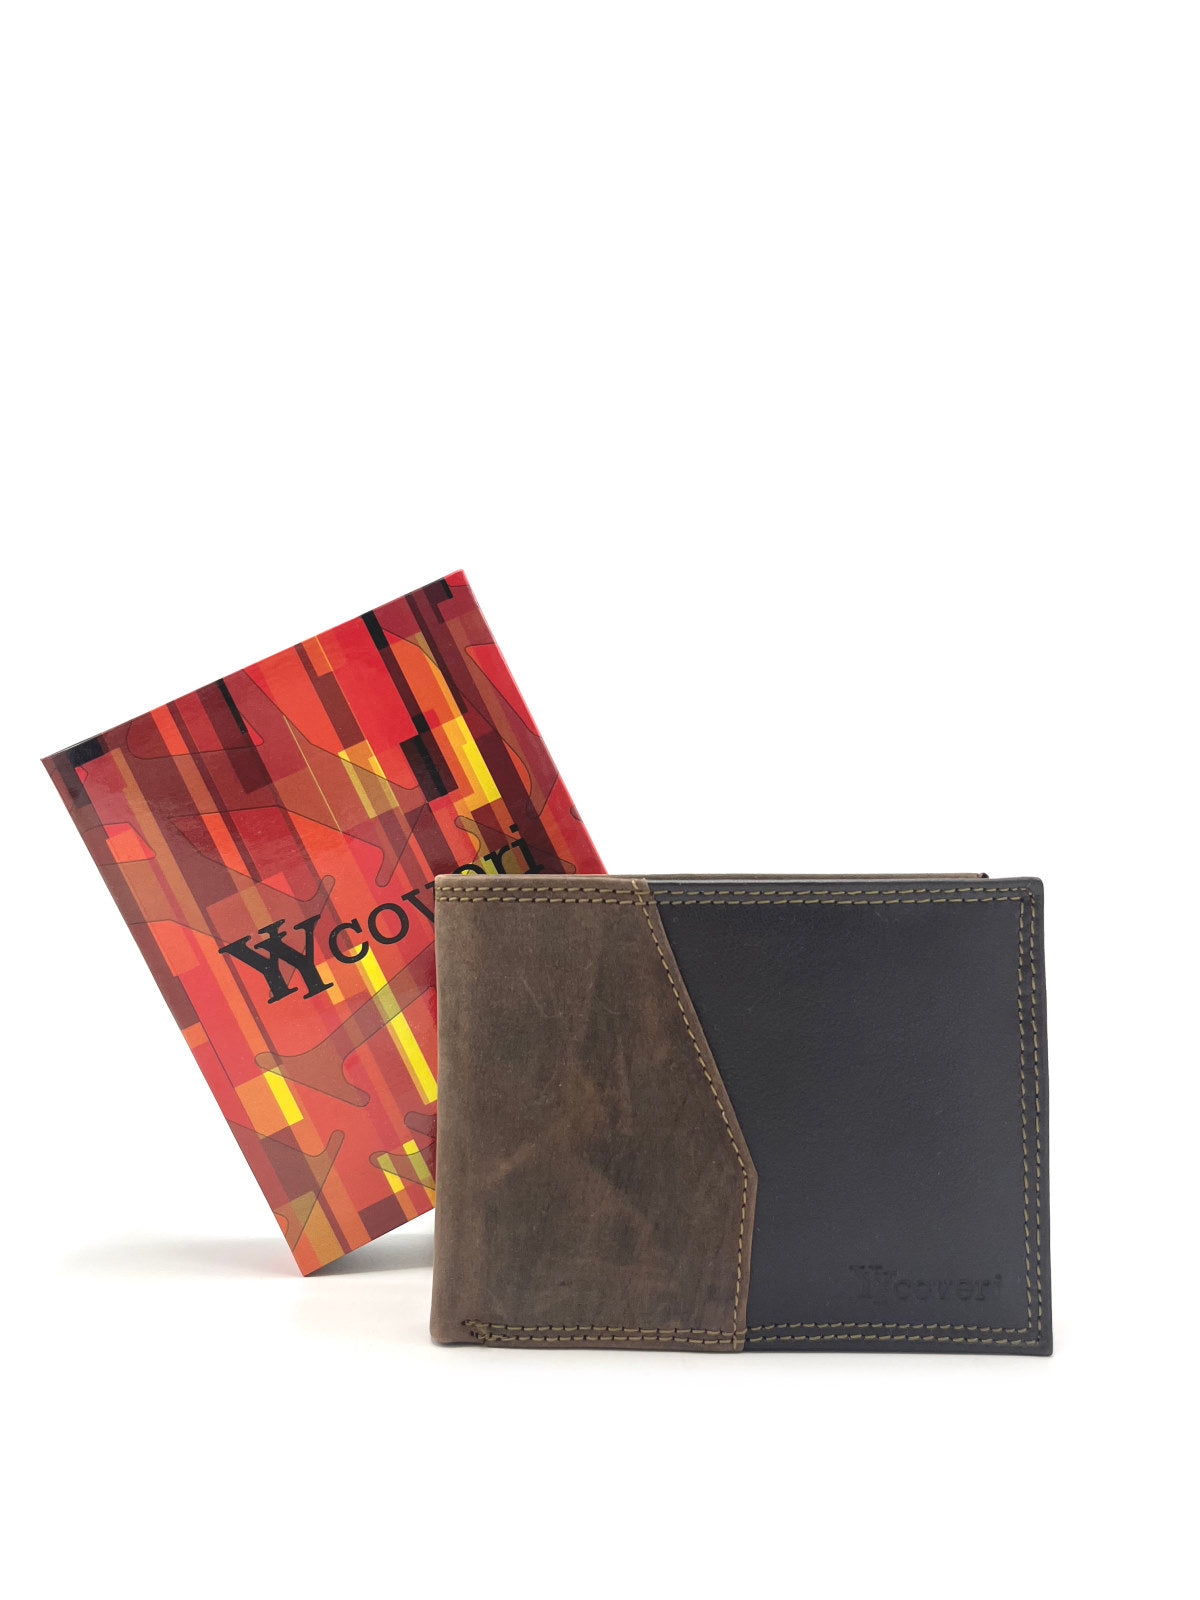 Genuine leather wallet for men, Brand You Young Coveri, art. NETT1161.422